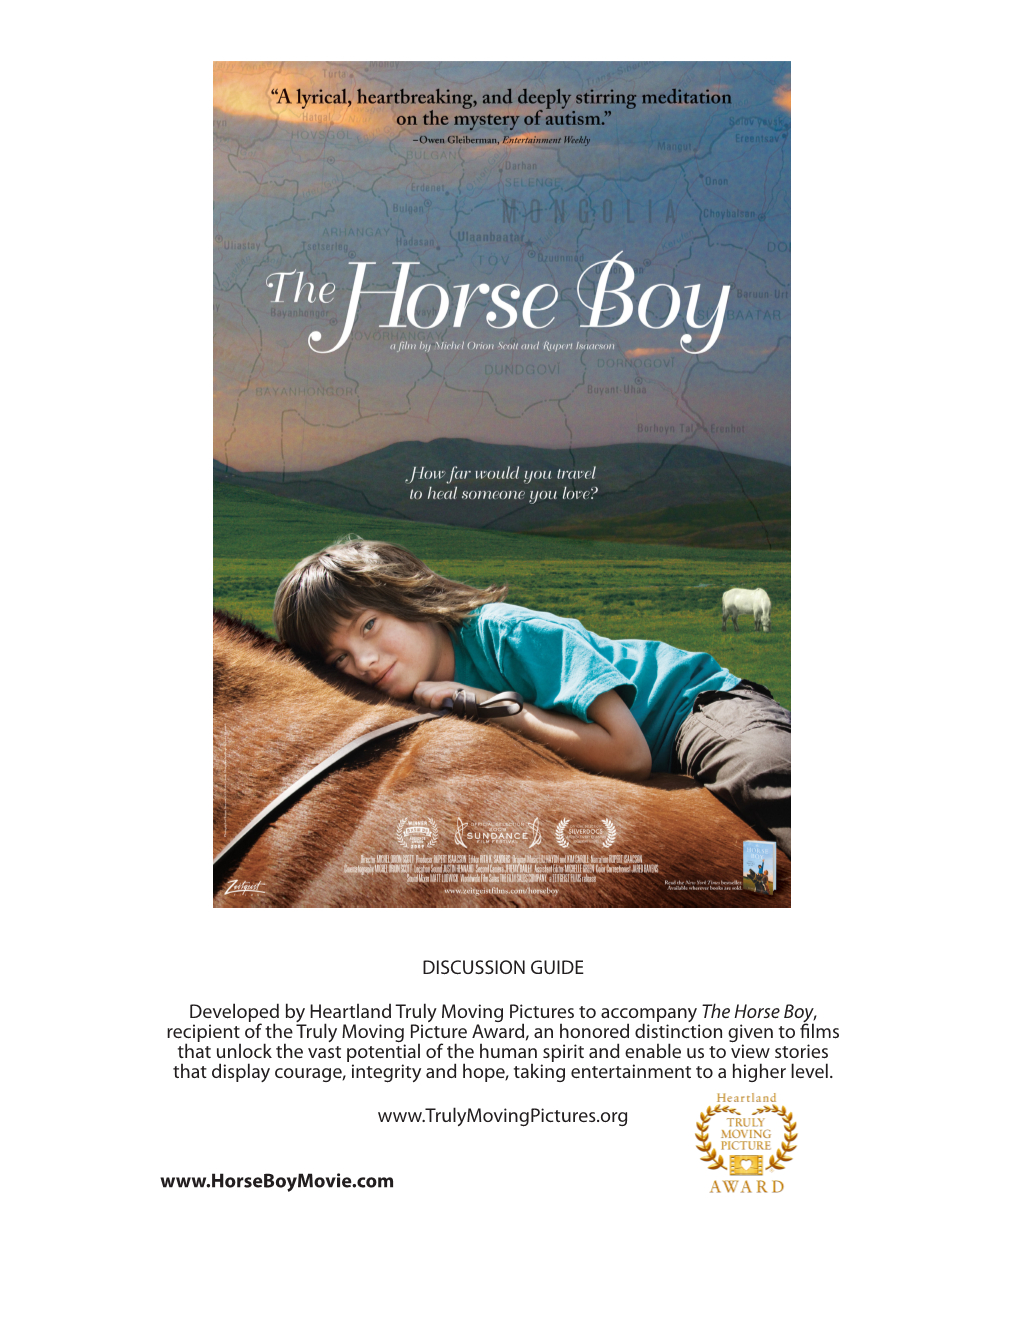 DISCUSSION GUIDE Developed by Heartland Truly Moving Pictures To